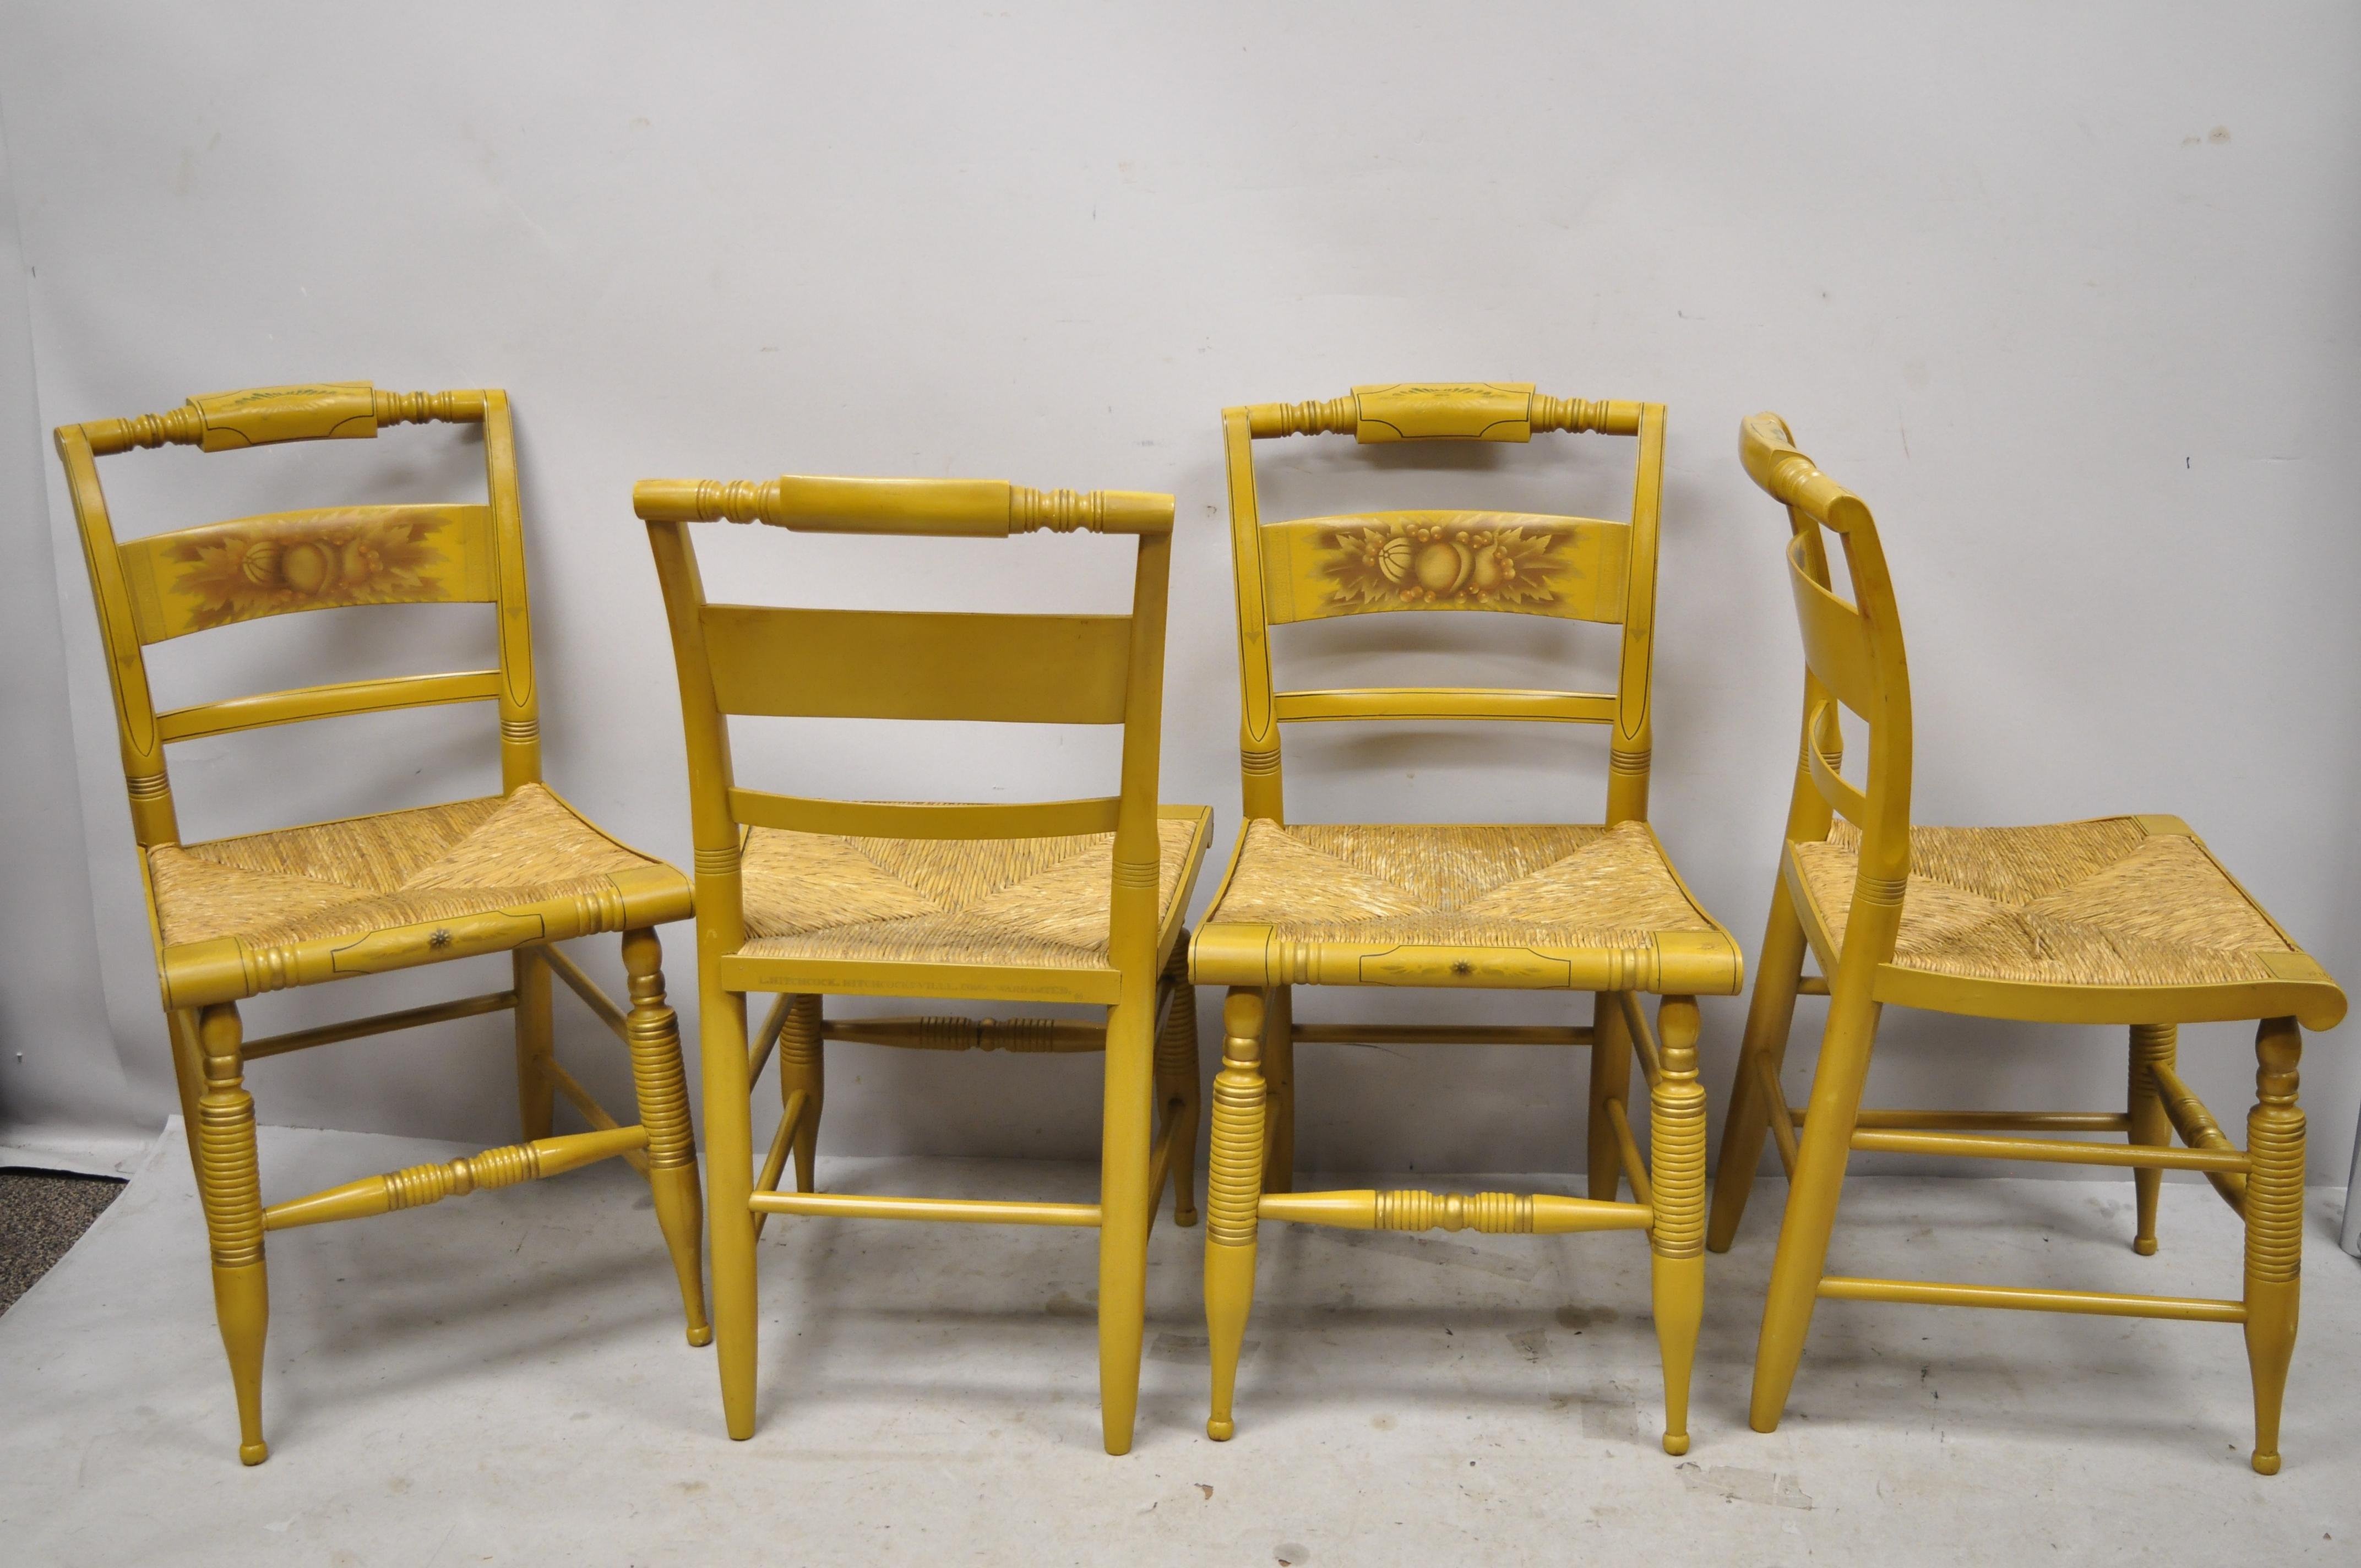 L. Hitchcock yellow stenciled rush seat dining side chairs - Set of 4. Item features yellow stencil painted details, woven rush cord seat, solid wood construction, original signature, very nice vintage item, quality American craftsmanship, circa mid